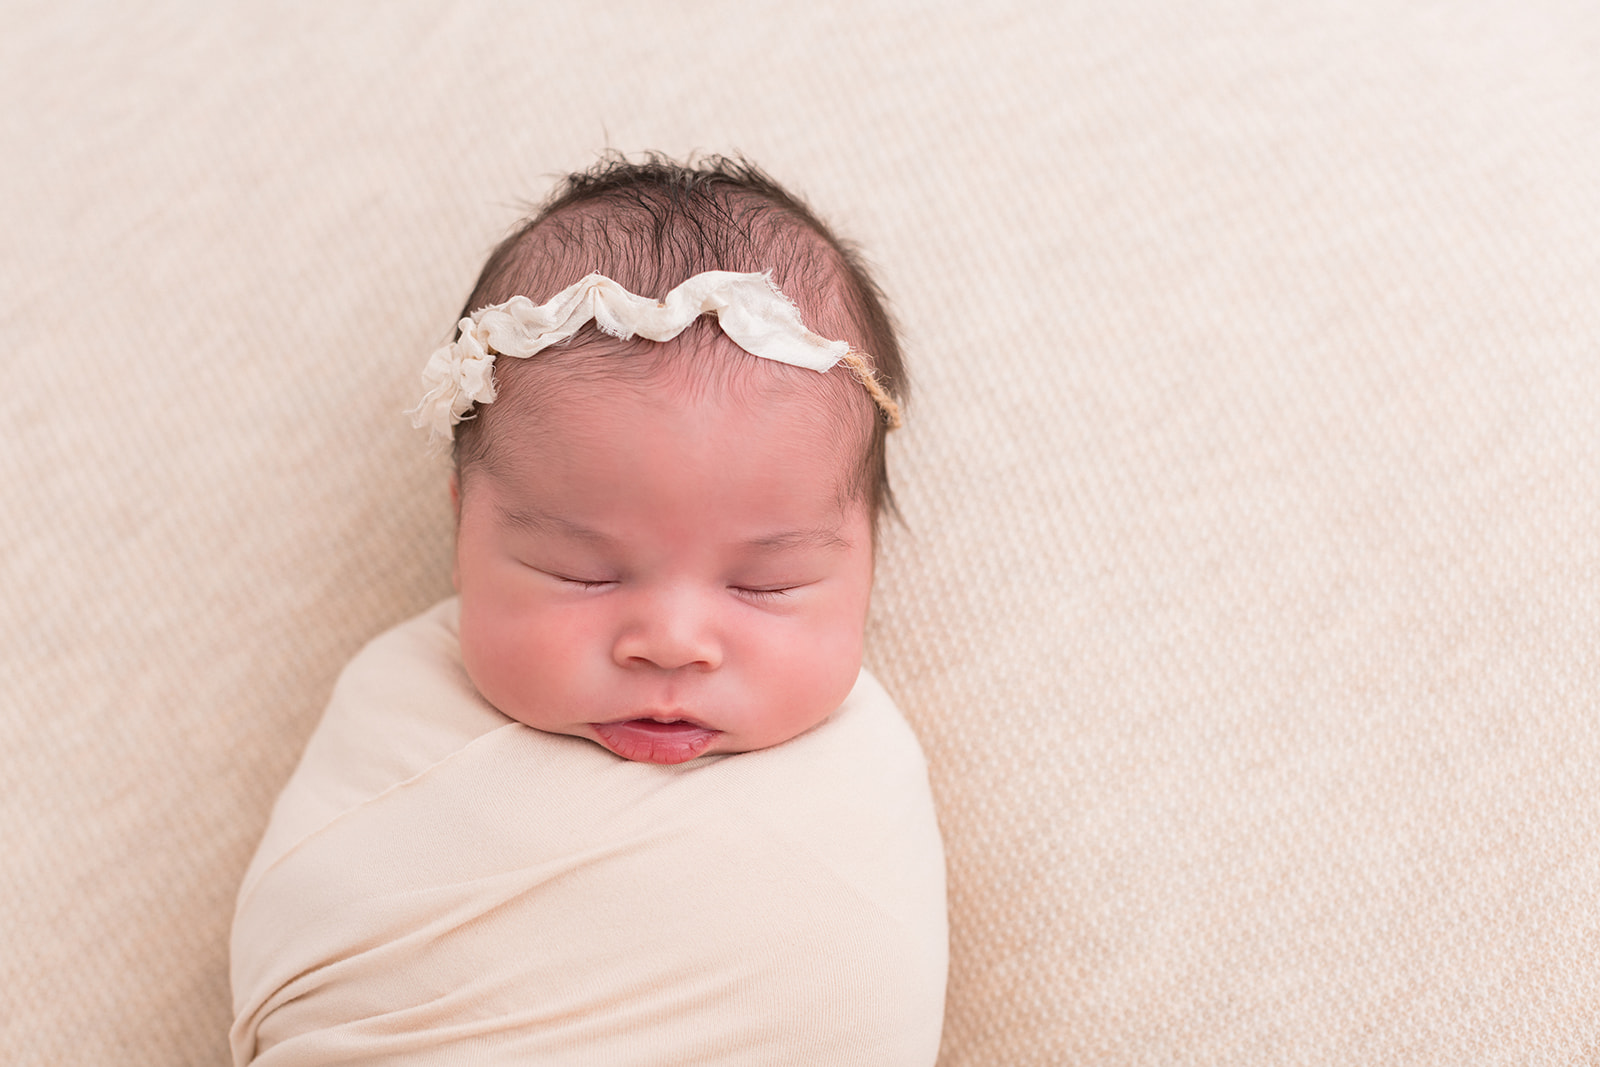 A newborn baby girl in a white fabric headband sleeps in a swaddle in a studio thanks to Portland Parenting classes